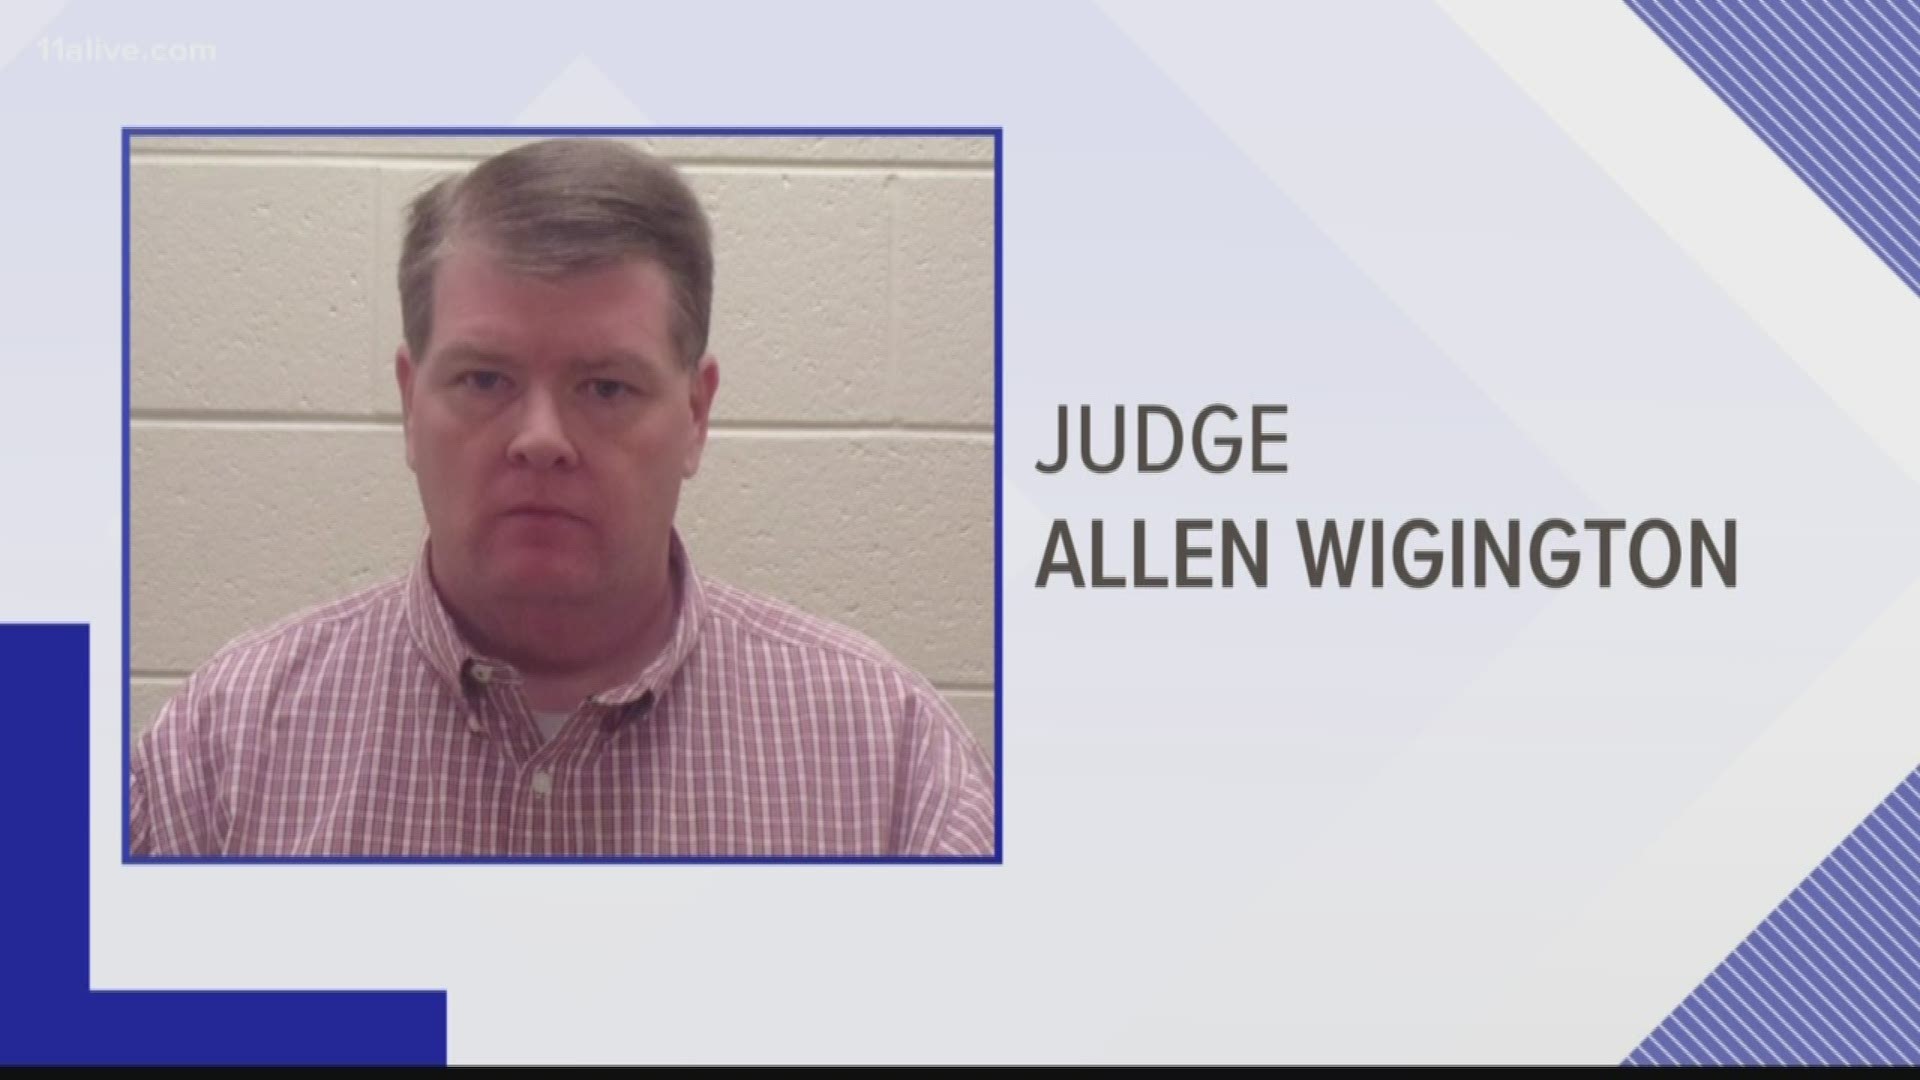 Judge Allen Wigington turned himself in at the Pickens County jail following a GBI investigation and a search warrant of his office.